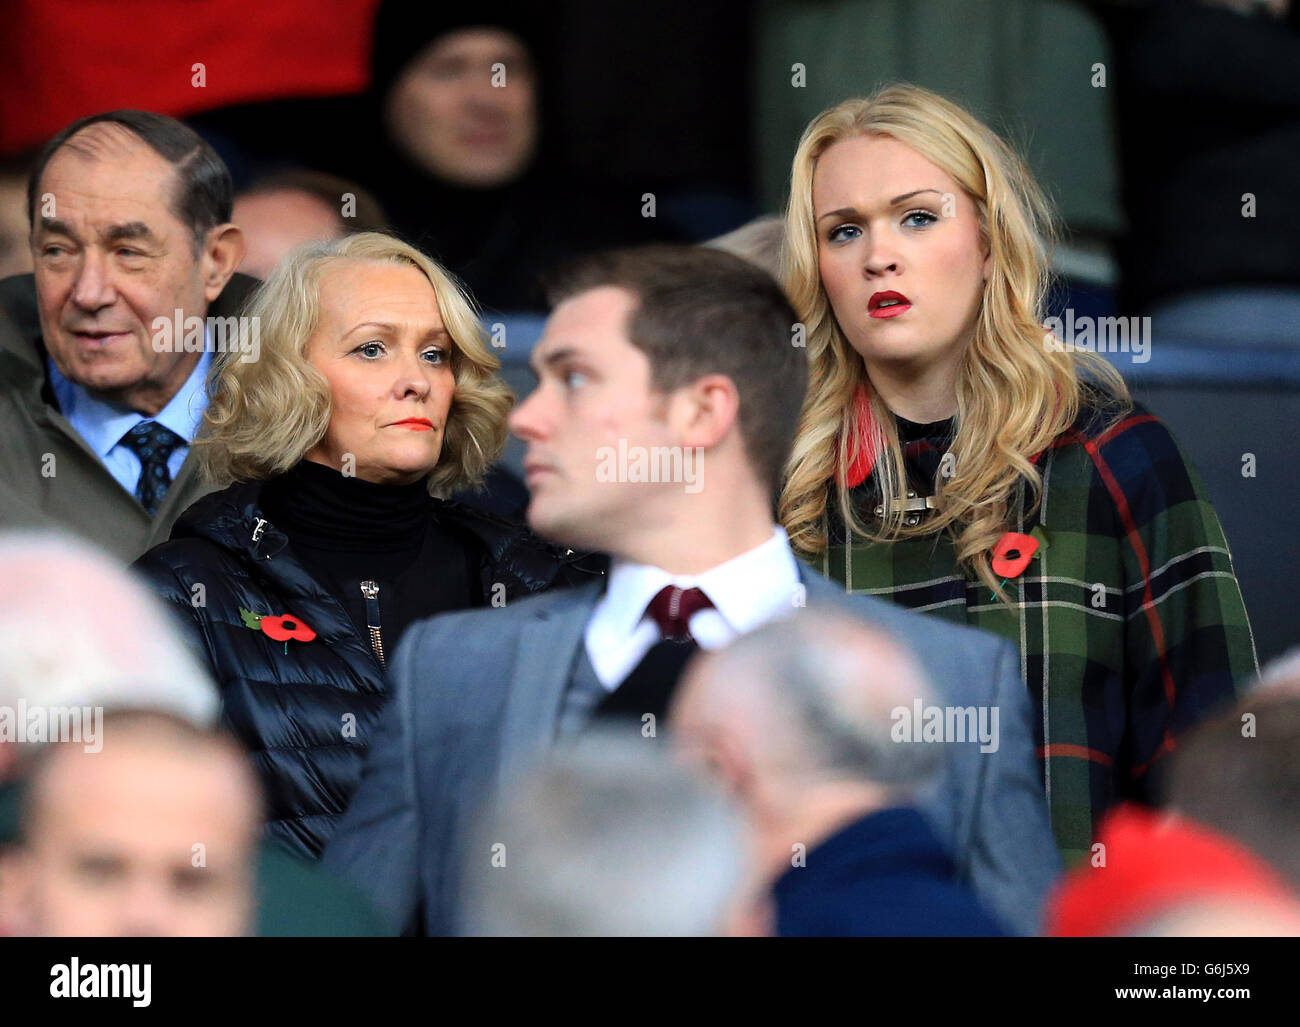 Pamela Moyes, the wife of Manchester United manager David, in the stands with daughter Lauren Moyes (right) Stock Photo